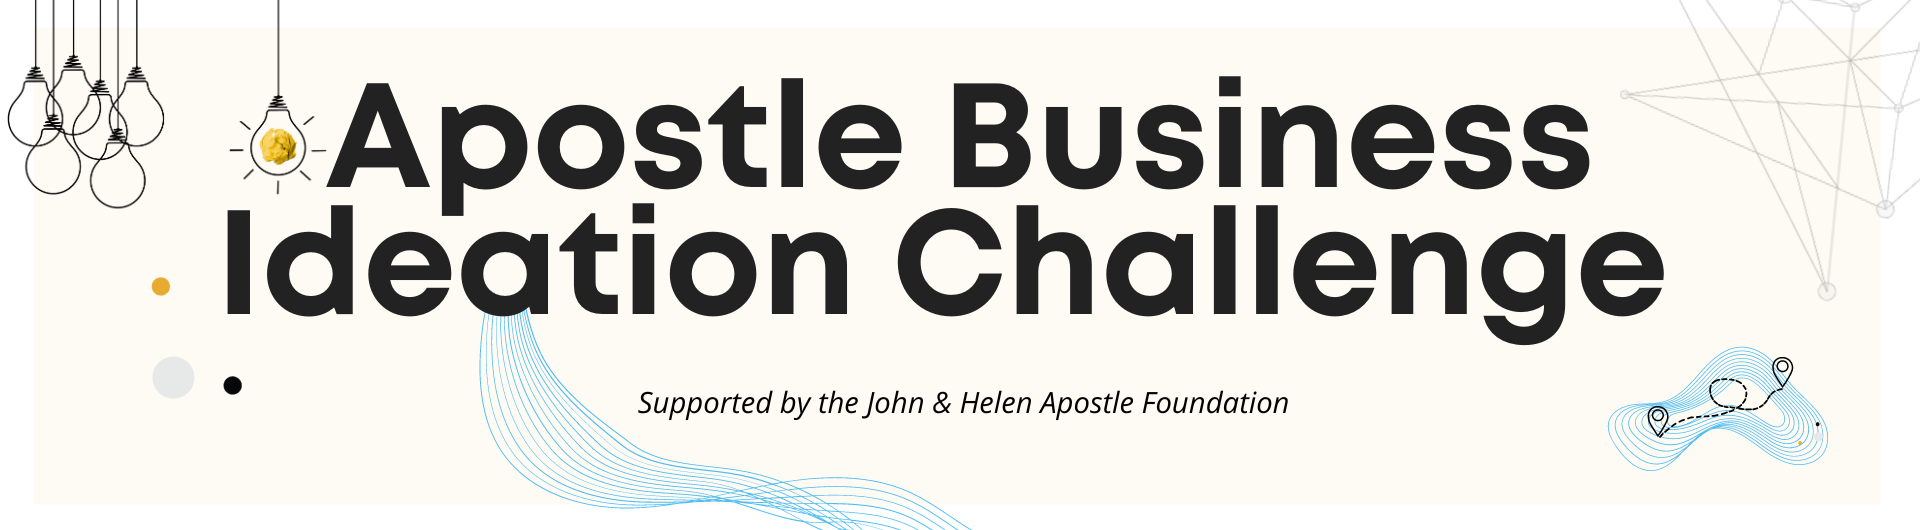 Apostle Business Ideation Challenge Supported by the John and Helen Apostle Foundation